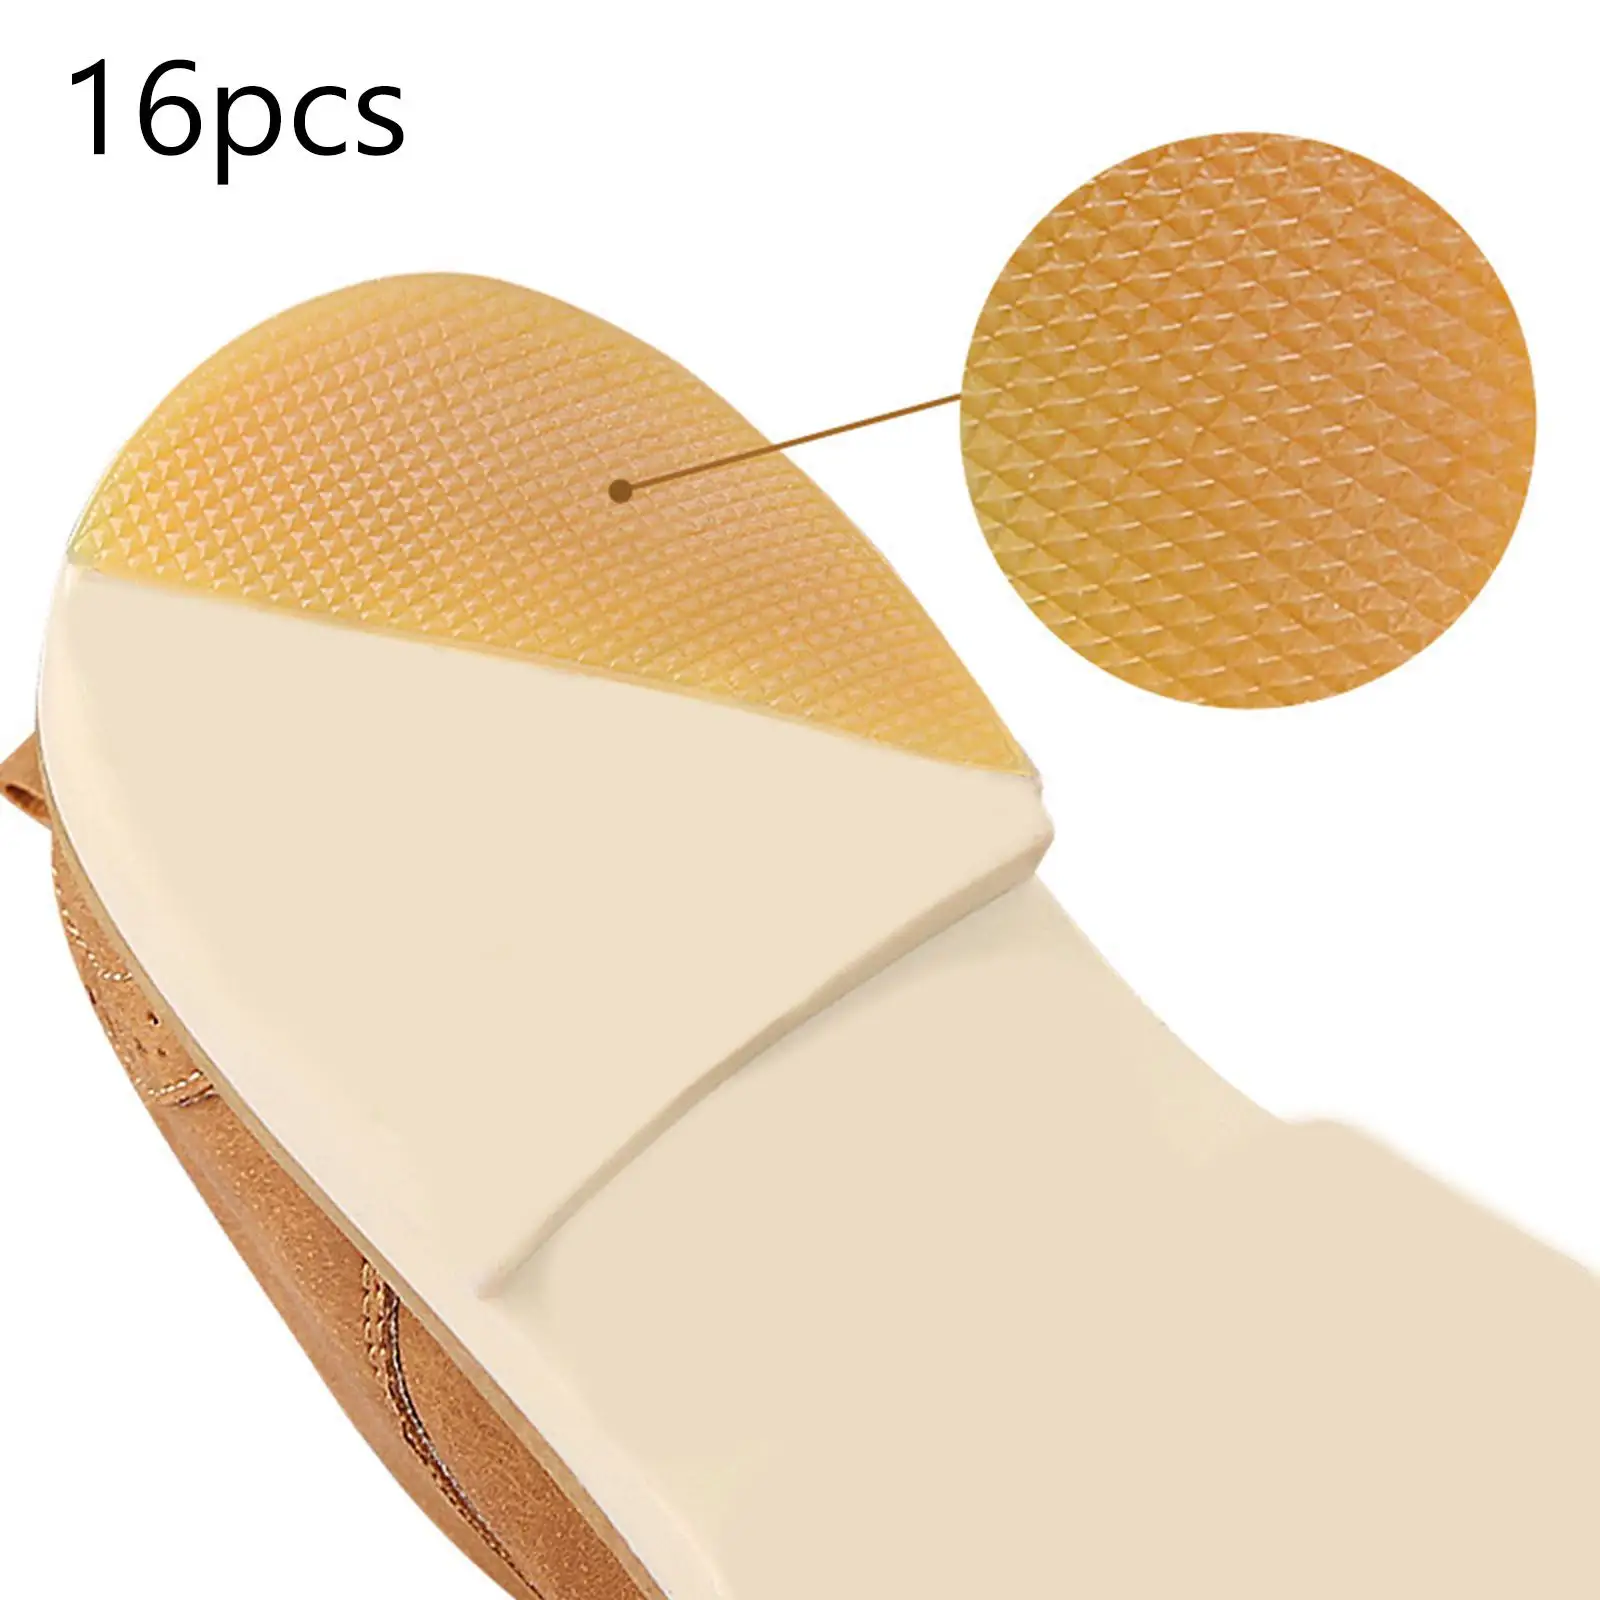 Heel Plates Anti Skid Shoe Pads 7mm Thickness Shoe Grips Shoe Sole for Shoes Heels DIY Sports Boots Leather Shoes Sneakers